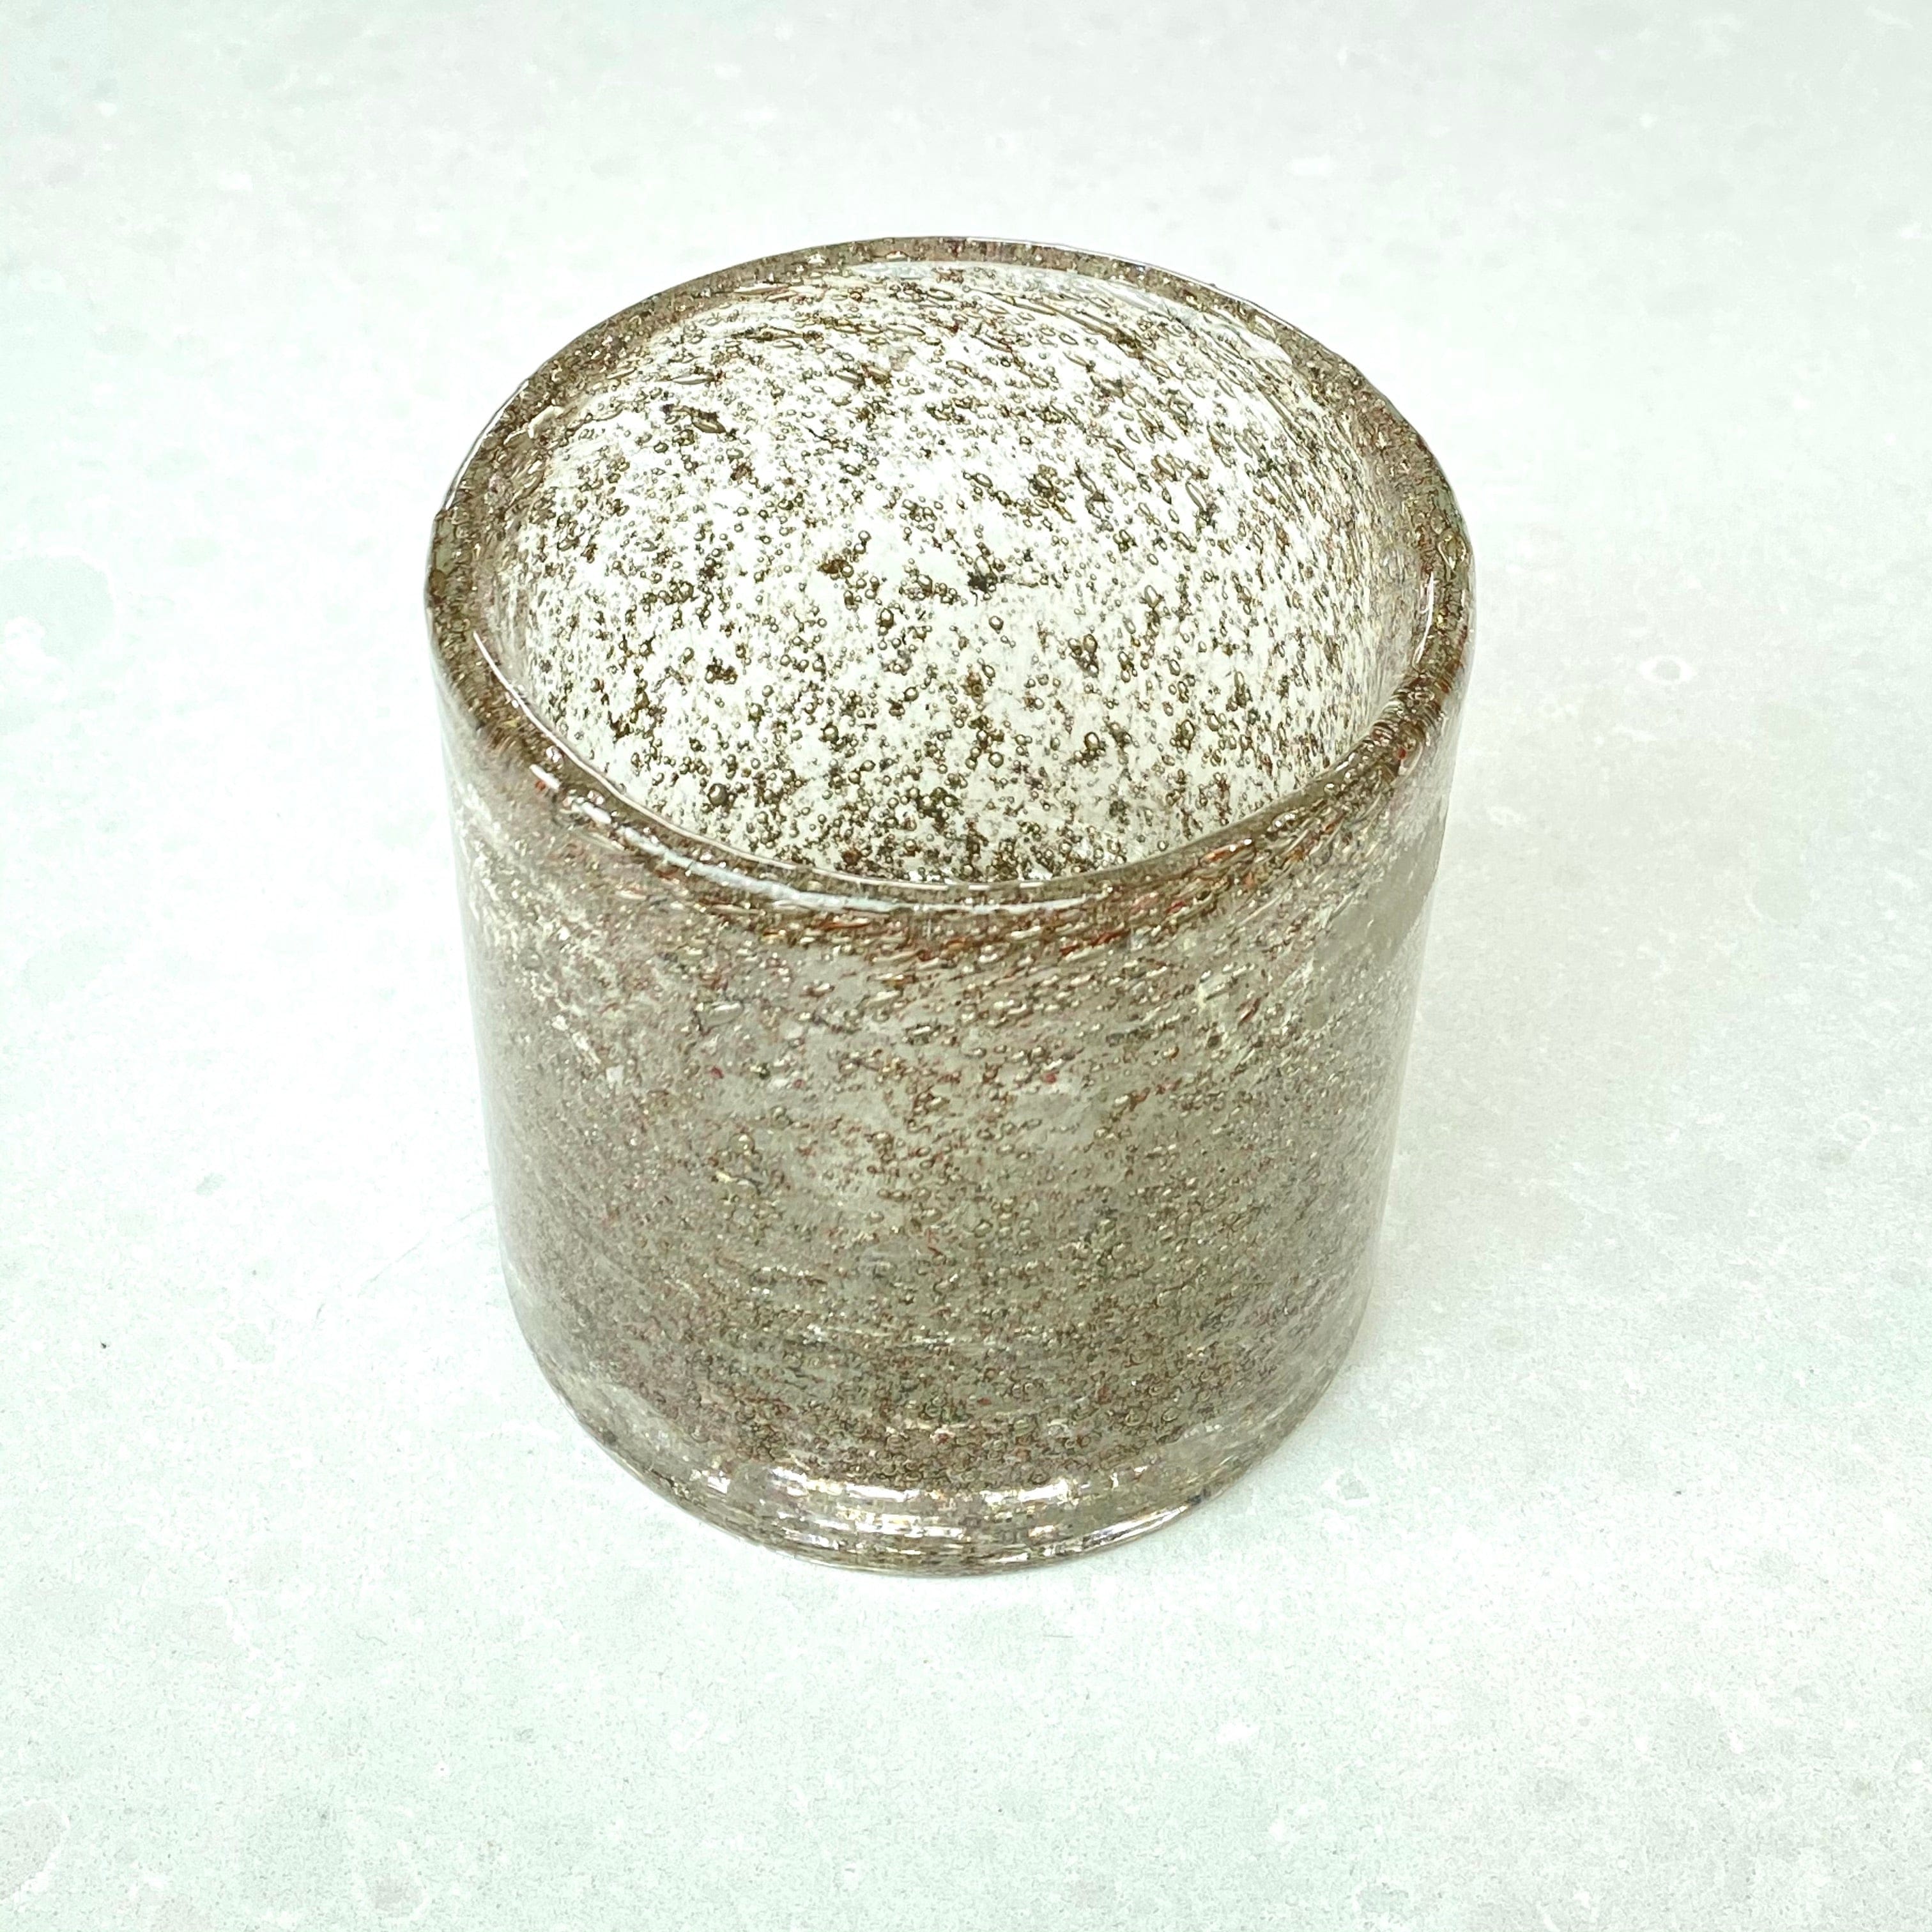 Stylish bronze bubble votive, home decor and accessories for your coffee table and living room bronze glass